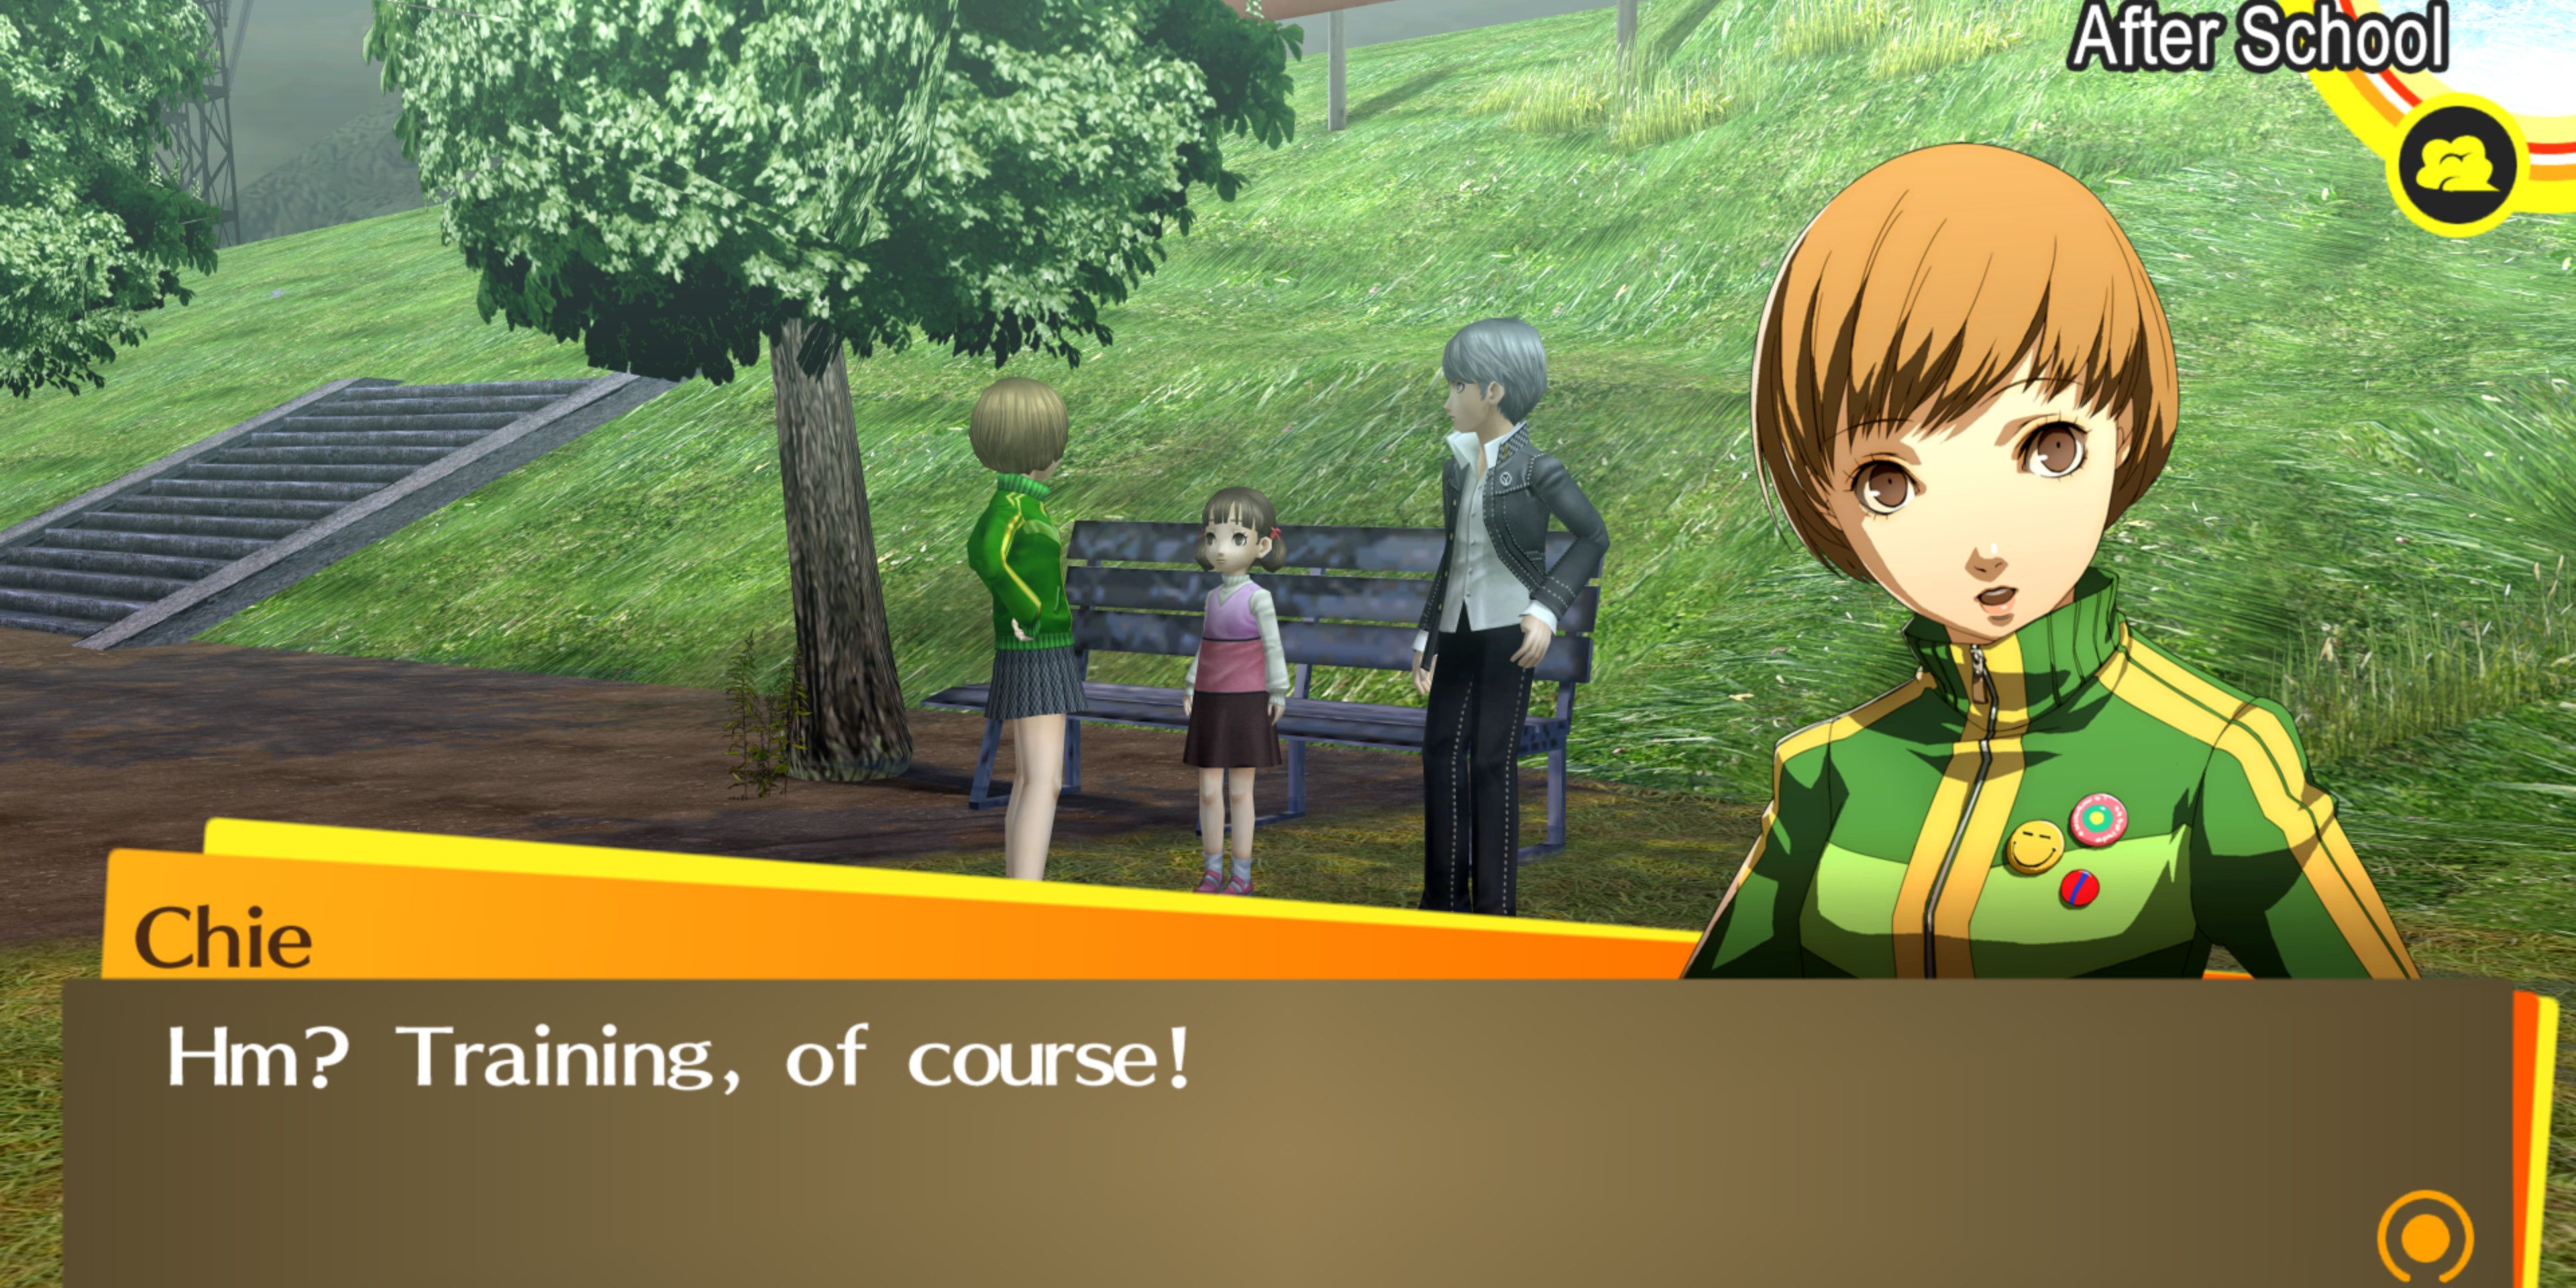 Chie down by the river with the Protagonist and Nanako in Persona 4